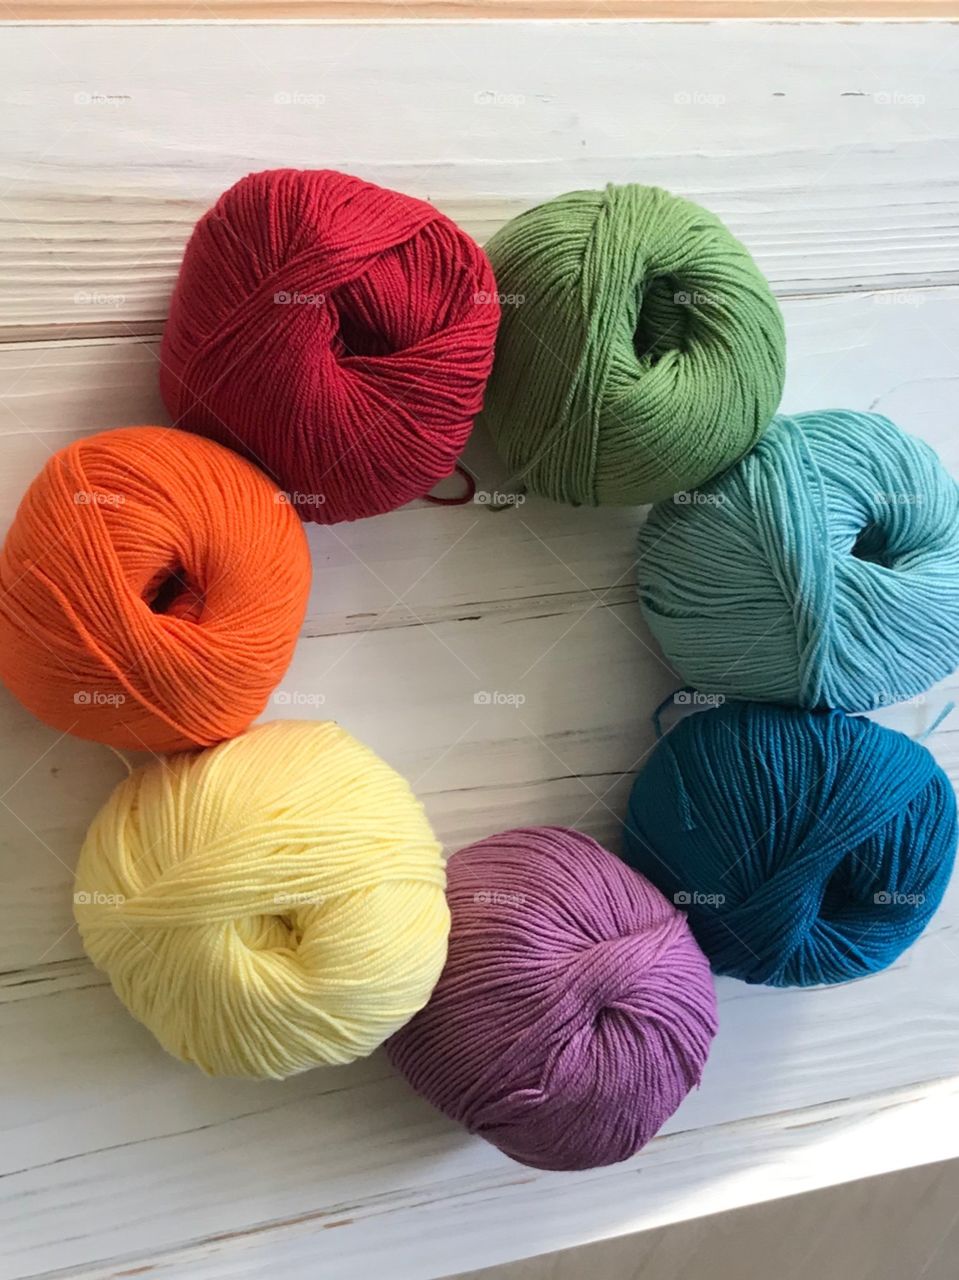 Yarn - colors of rainbow in a circle